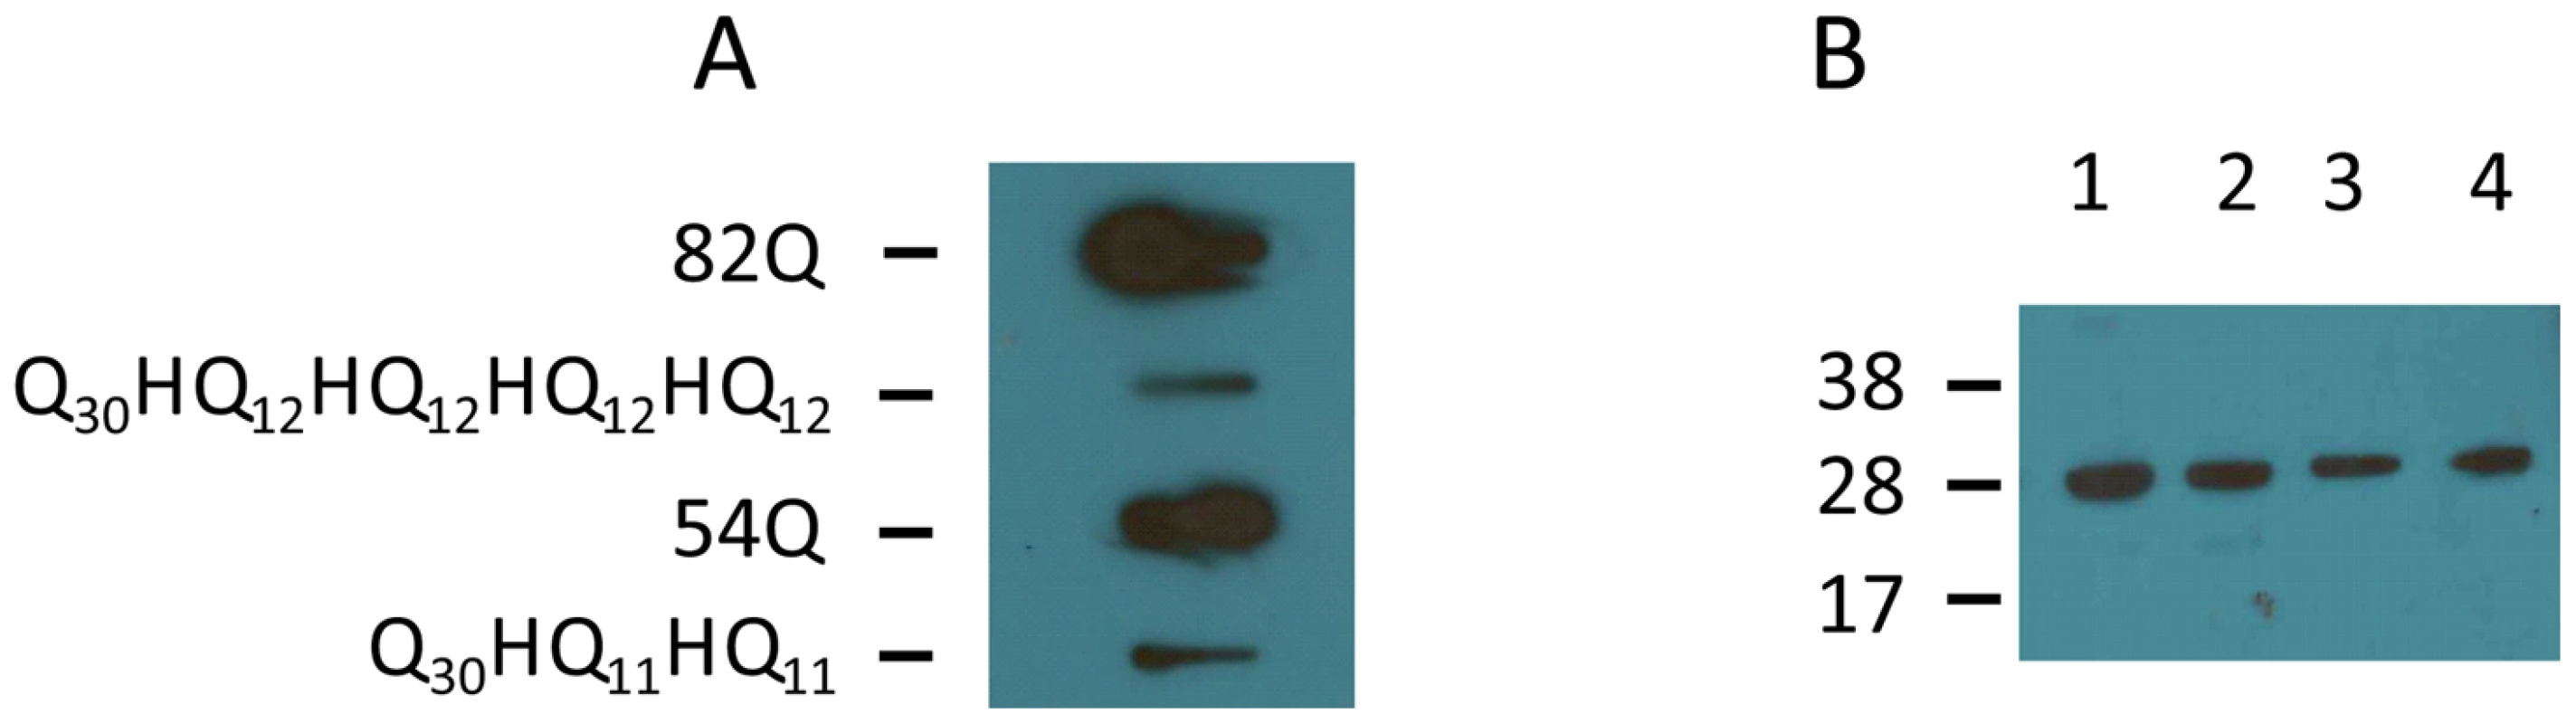 Detection of protein aggregates formed in transfected COS cells by slot blot filter assay.